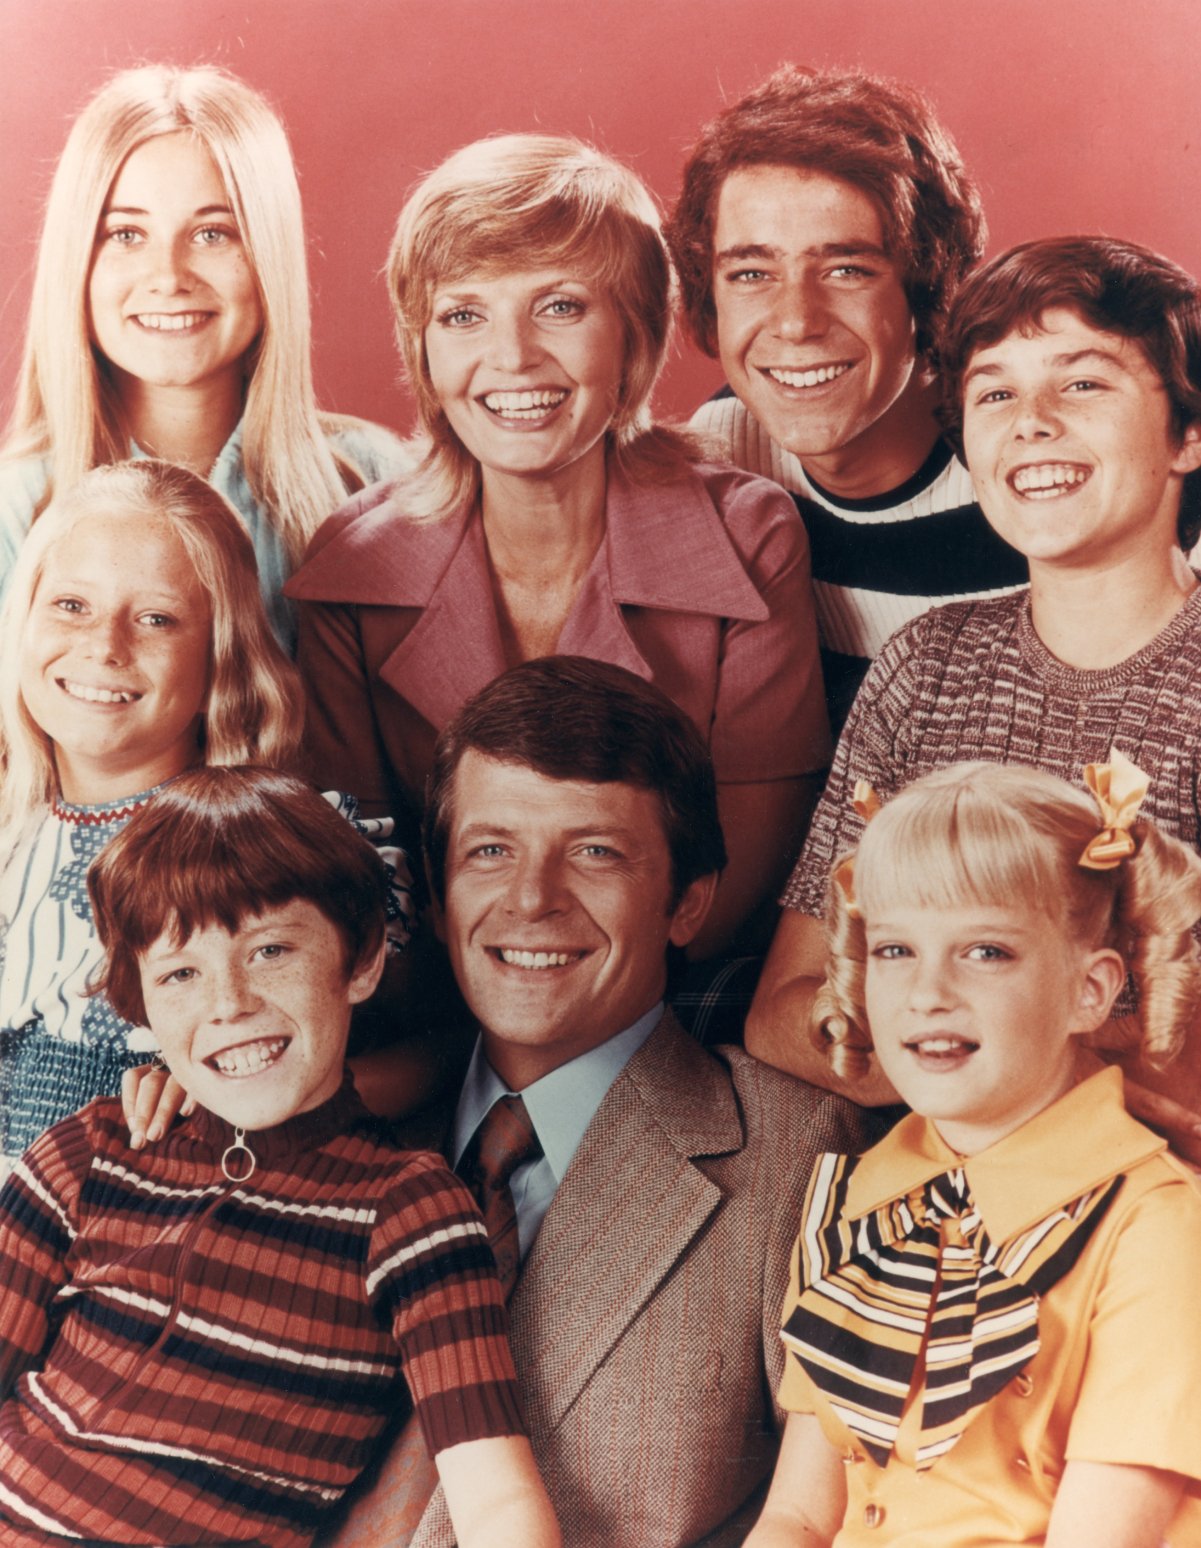 The cast of 'The Brady Bunch'